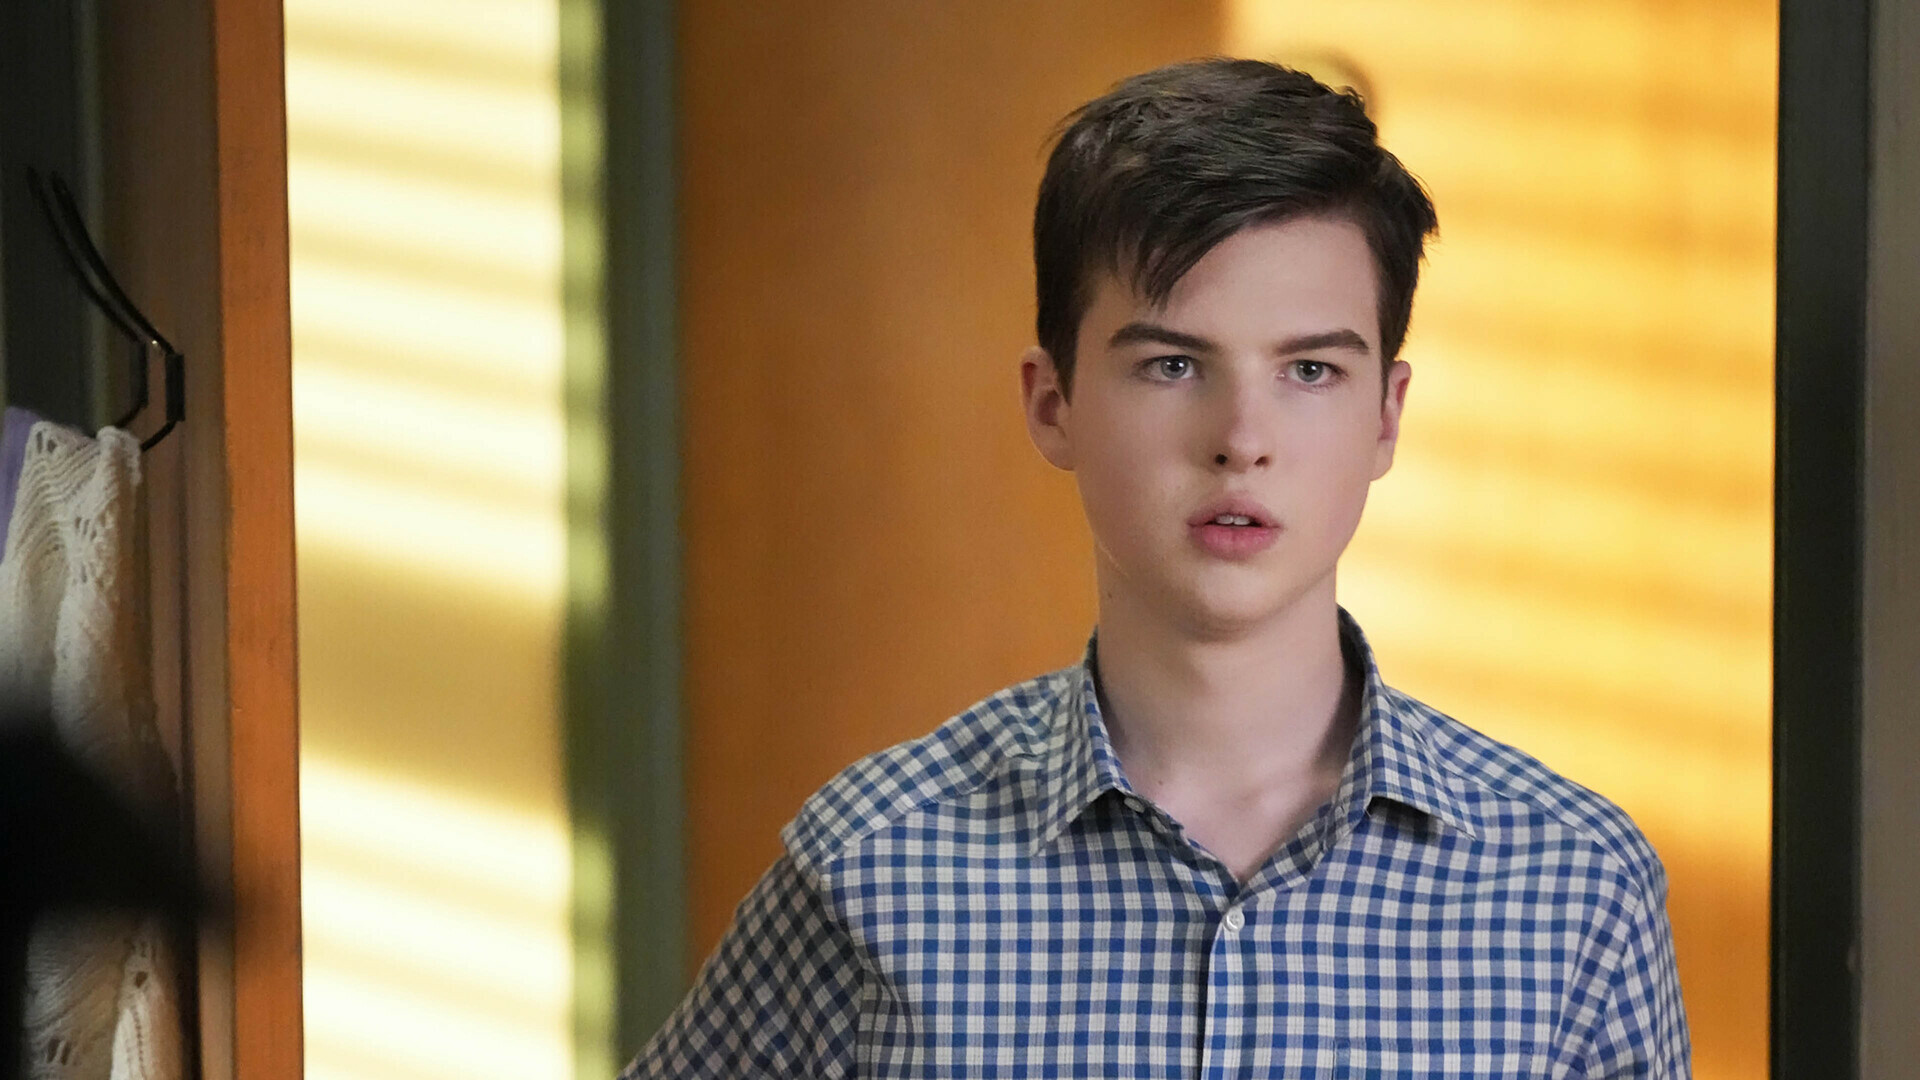 "Endings Are Always Really Difficult": How "Young Sheldon" At Last Reached That Heartbreaking Moment